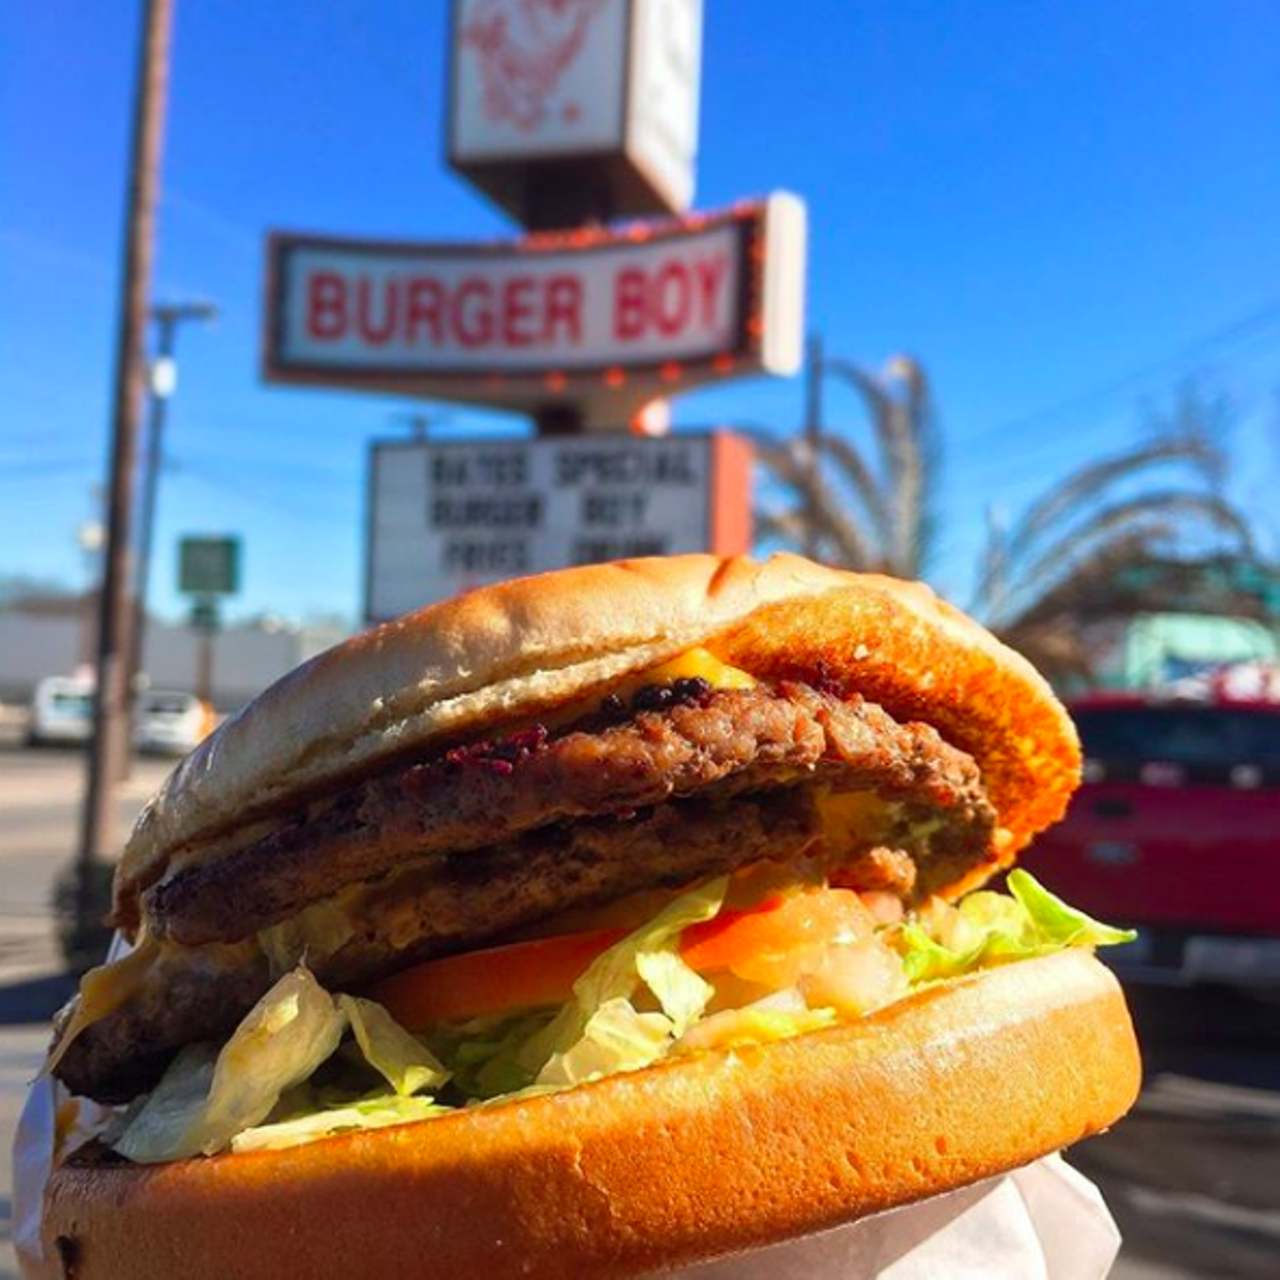 Burger Boy
Multiple locations, burgerboysa.com
Go for the classics here during Burger Week. The famous Double Boy features two patties (duh), mustard, lettuce, onion, tomato and pickles. Sometimes simple is better.
Photo via Instagram / burgerboysa